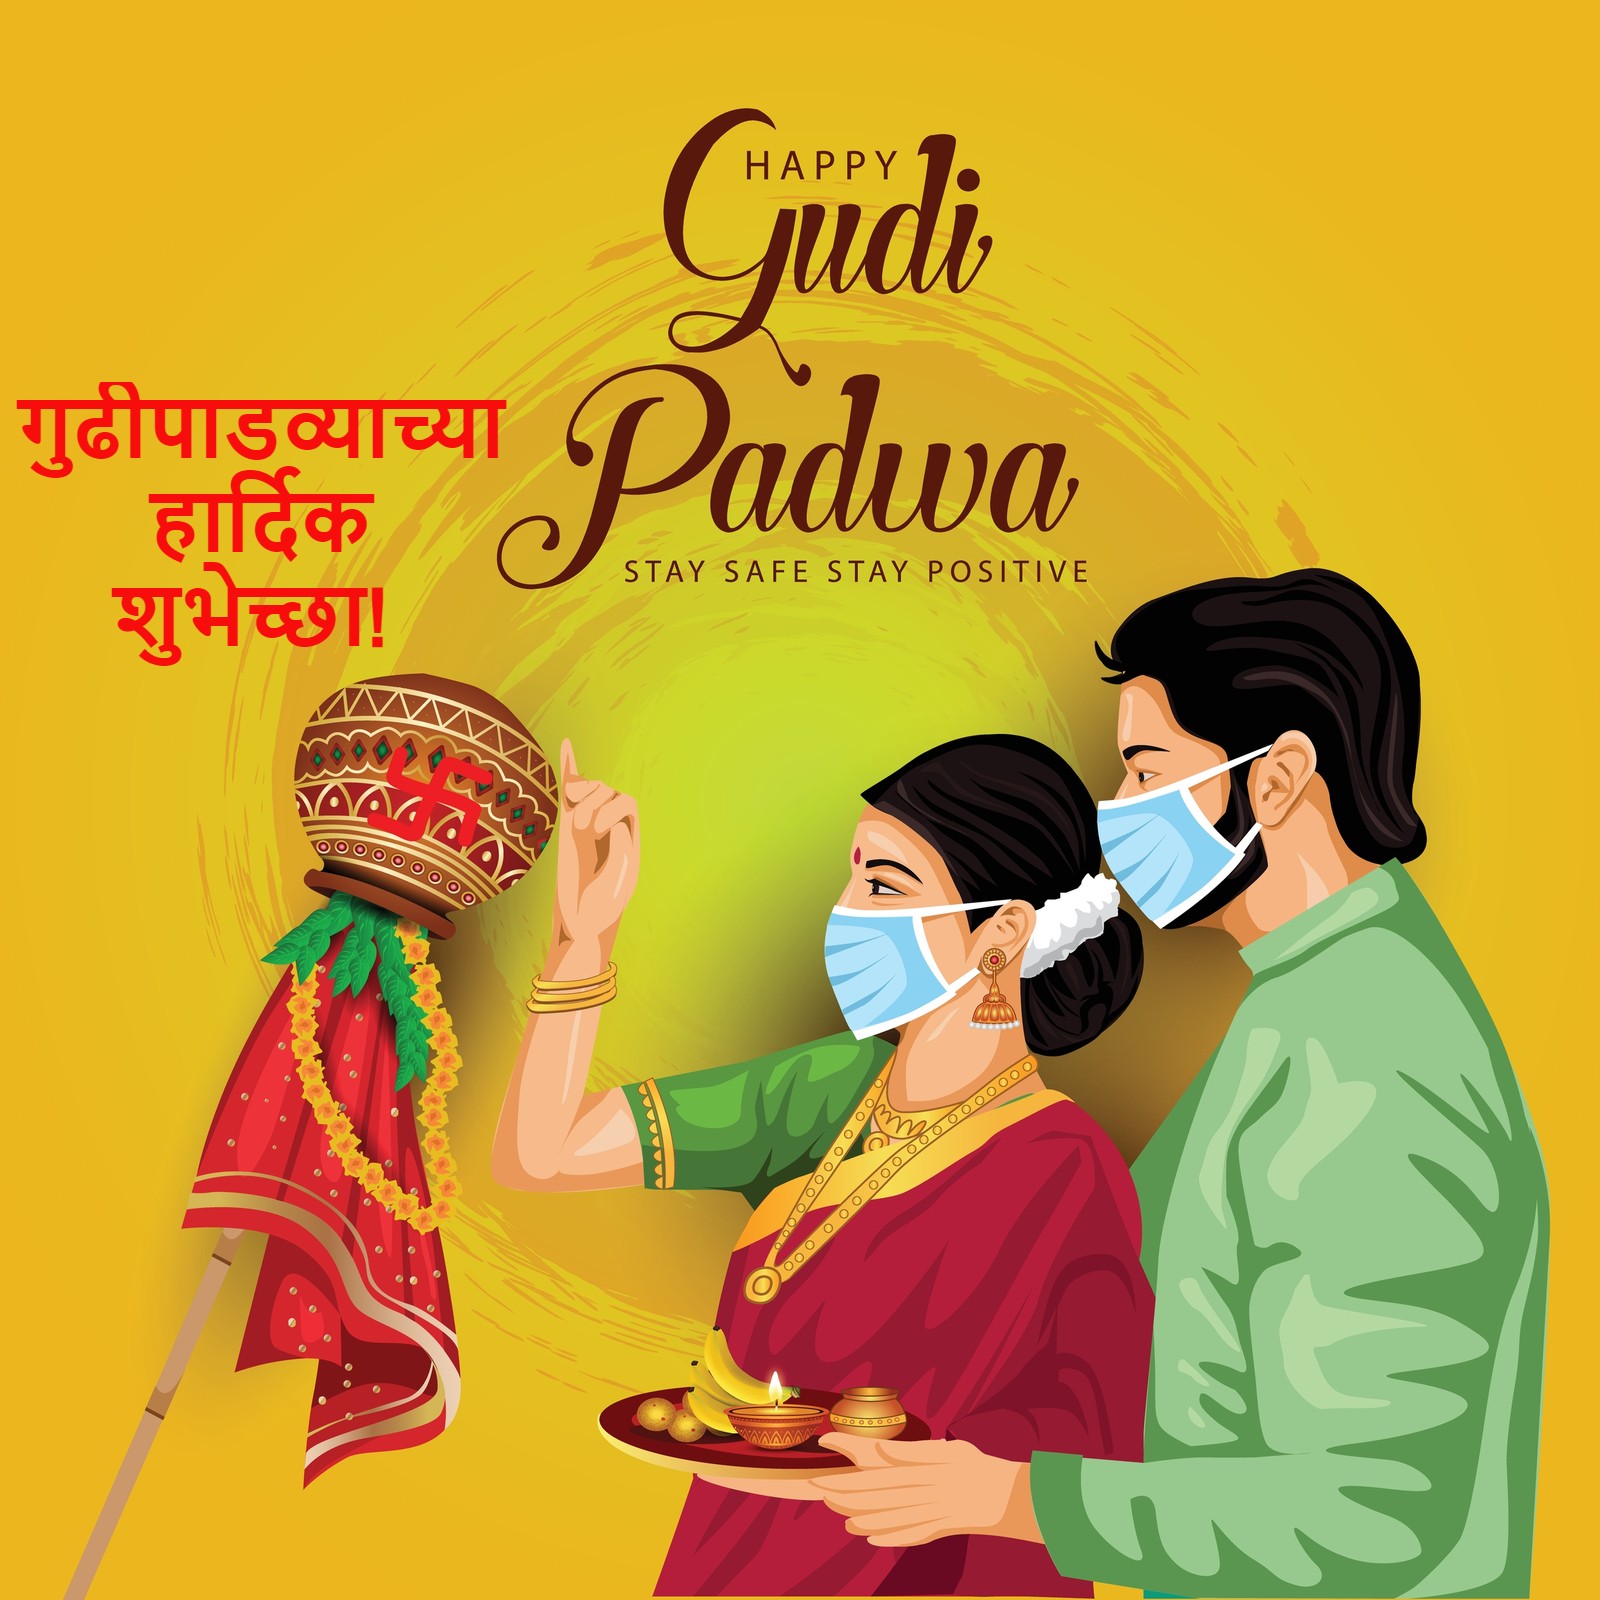 Happy Gudi Padwa 2022: Wishes, Images, Status, Quotes, Messages and  WhatsApp Greetings to Share in English, Hindi and Marathi